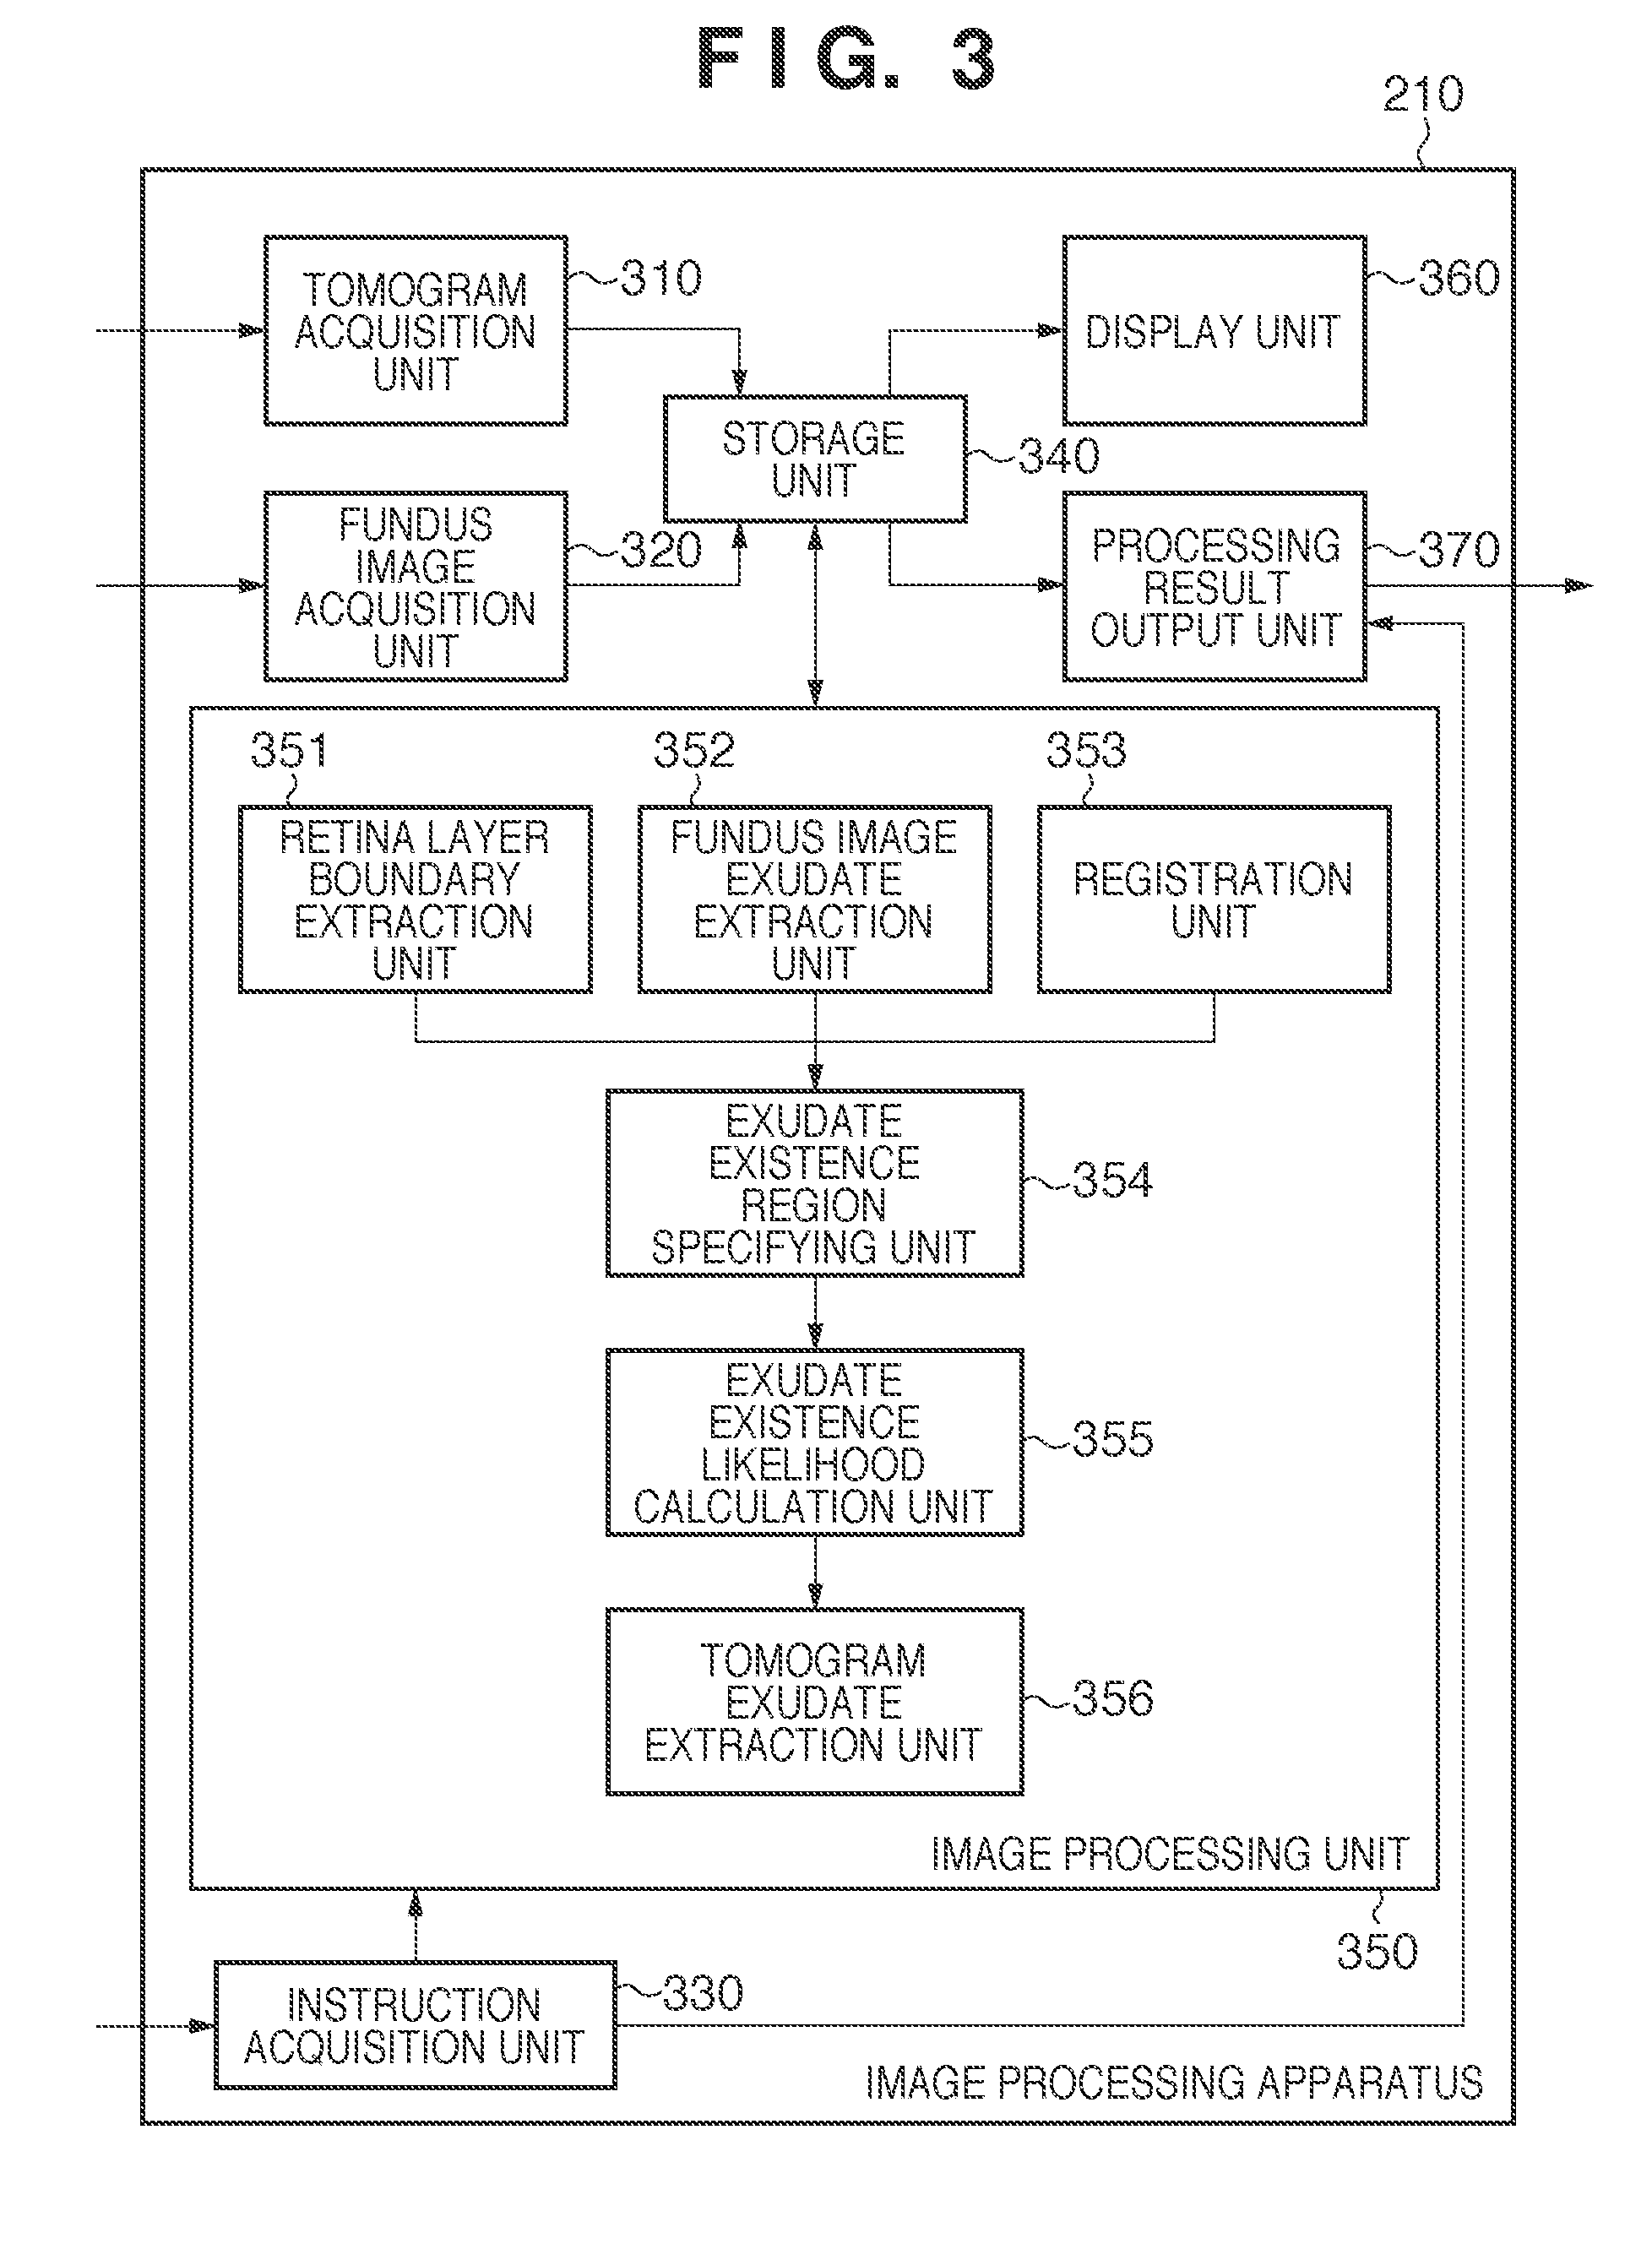 Image processing apparatus for processing a tomogram of an eye to be examined, image processing method, and computer-readable storage medium